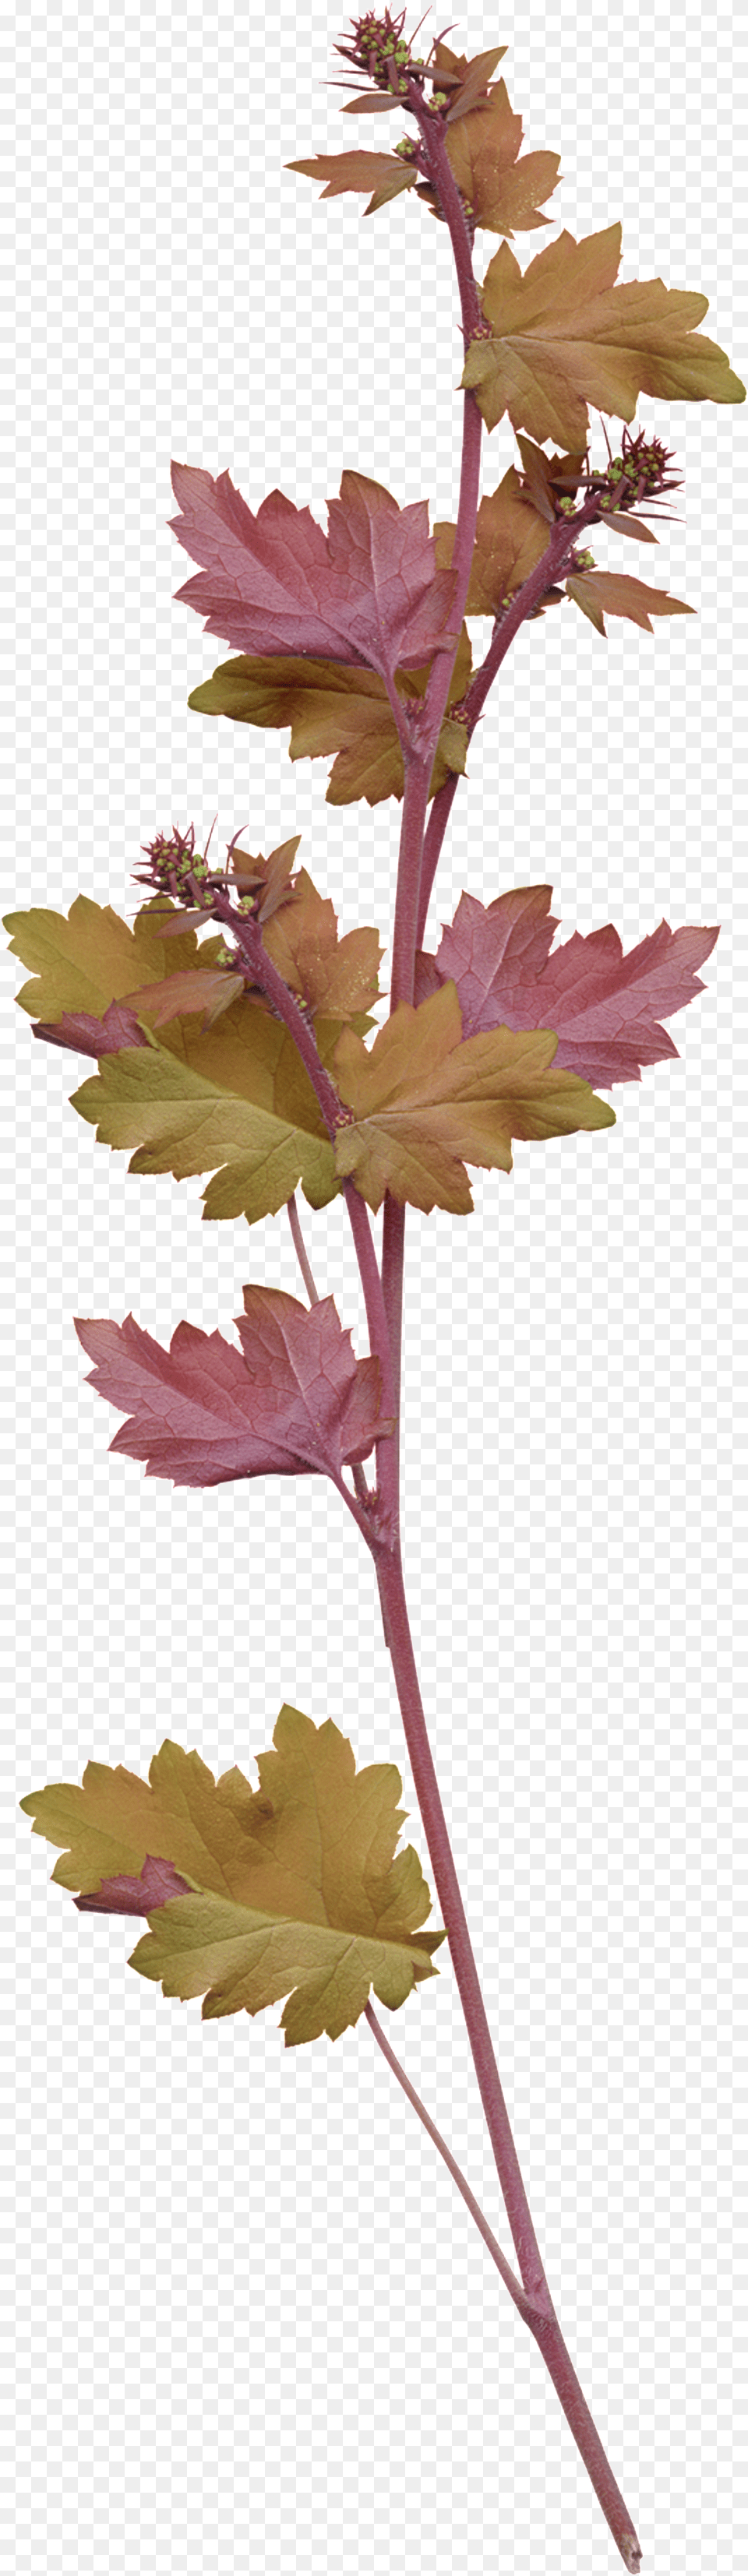 Red Yellow Maple Watercolor Transparent Illustration Grape, Leaf, Plant, Tree, Flower Png